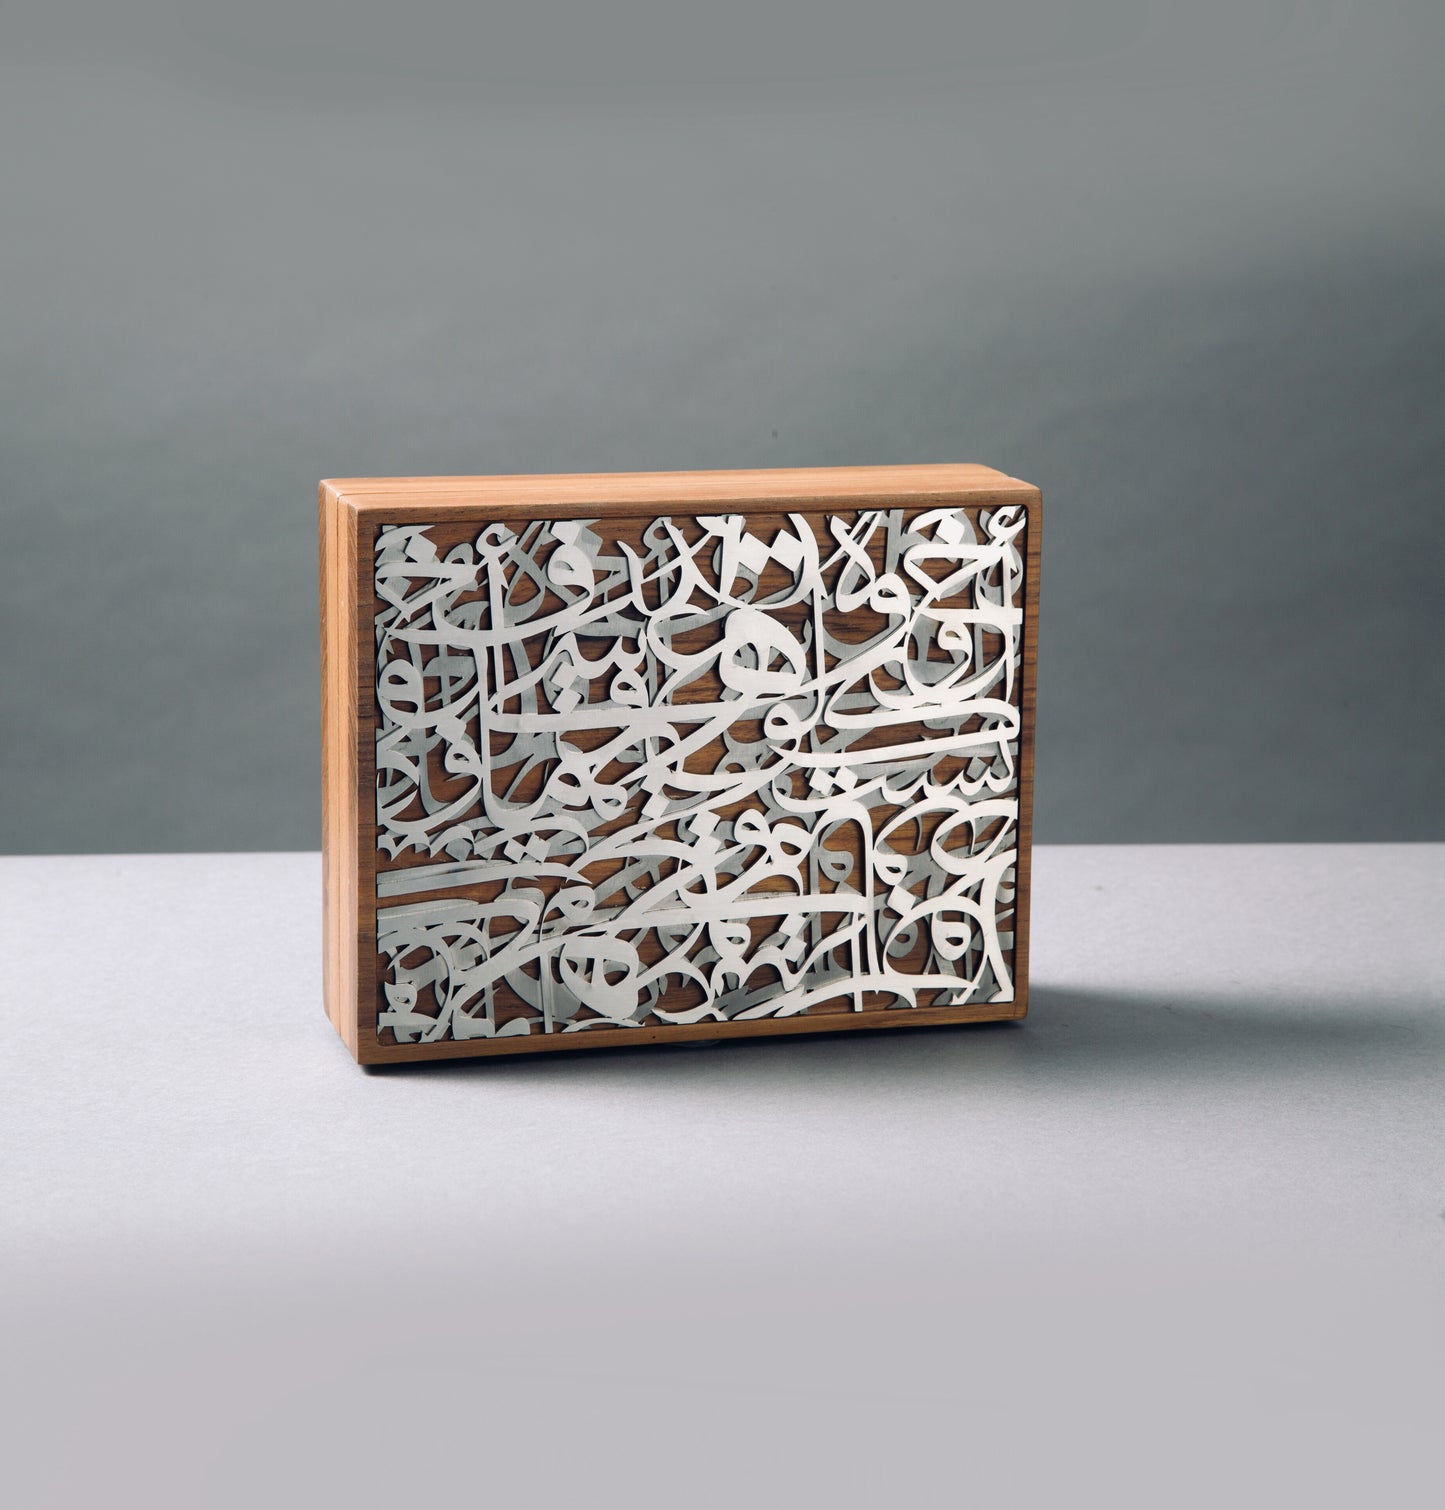 Overlapping Caligraphy steel x wooden clutch